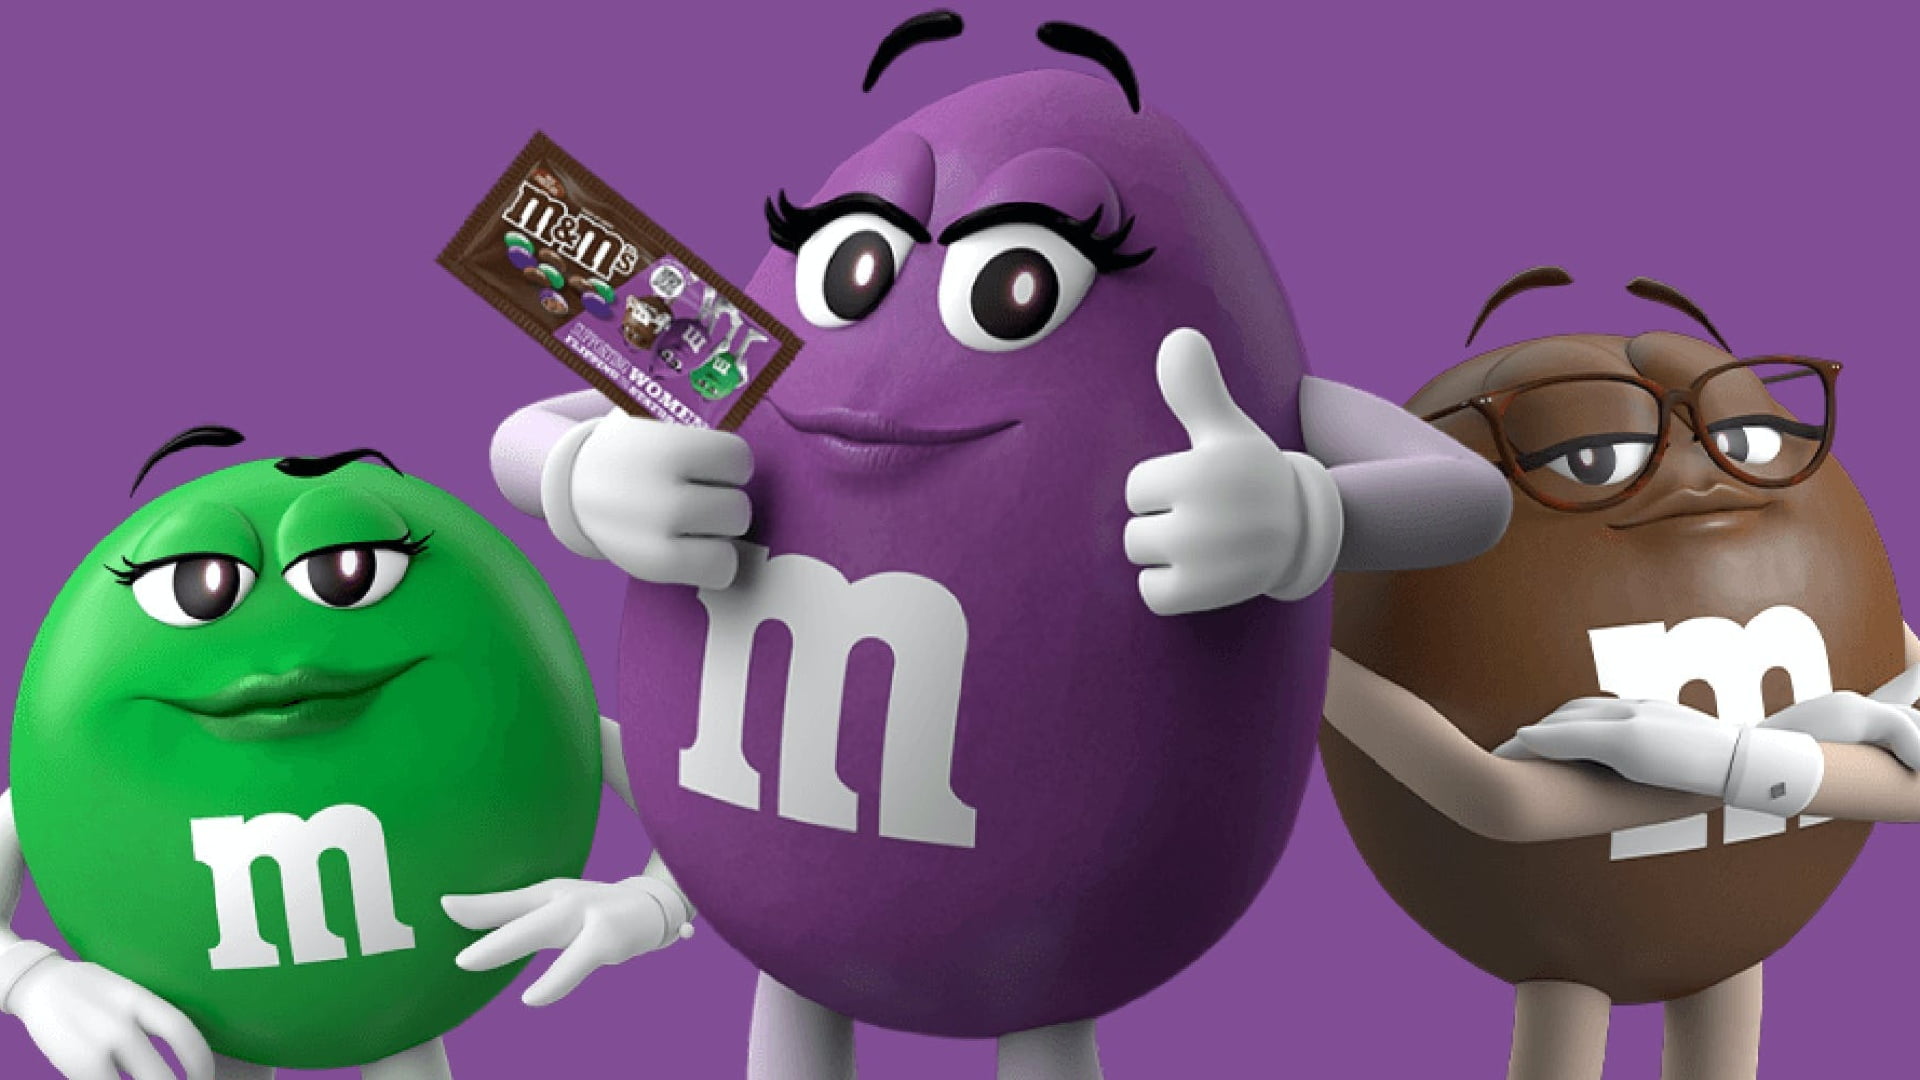 The green M&M scandal just got even more ridiculous